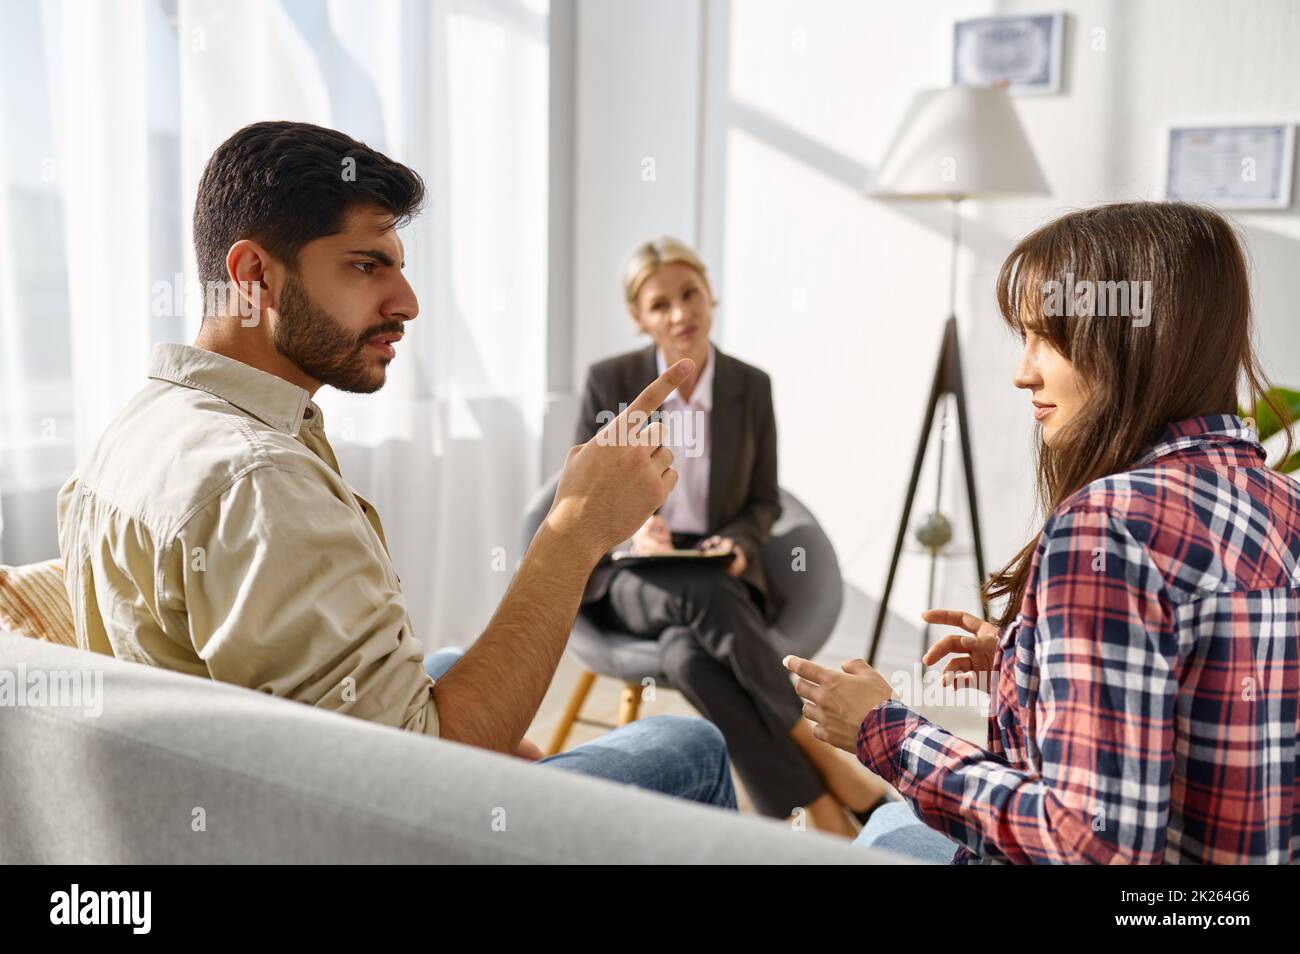 Unhappy couple arguing disagreement at psychologists office Stock Photo